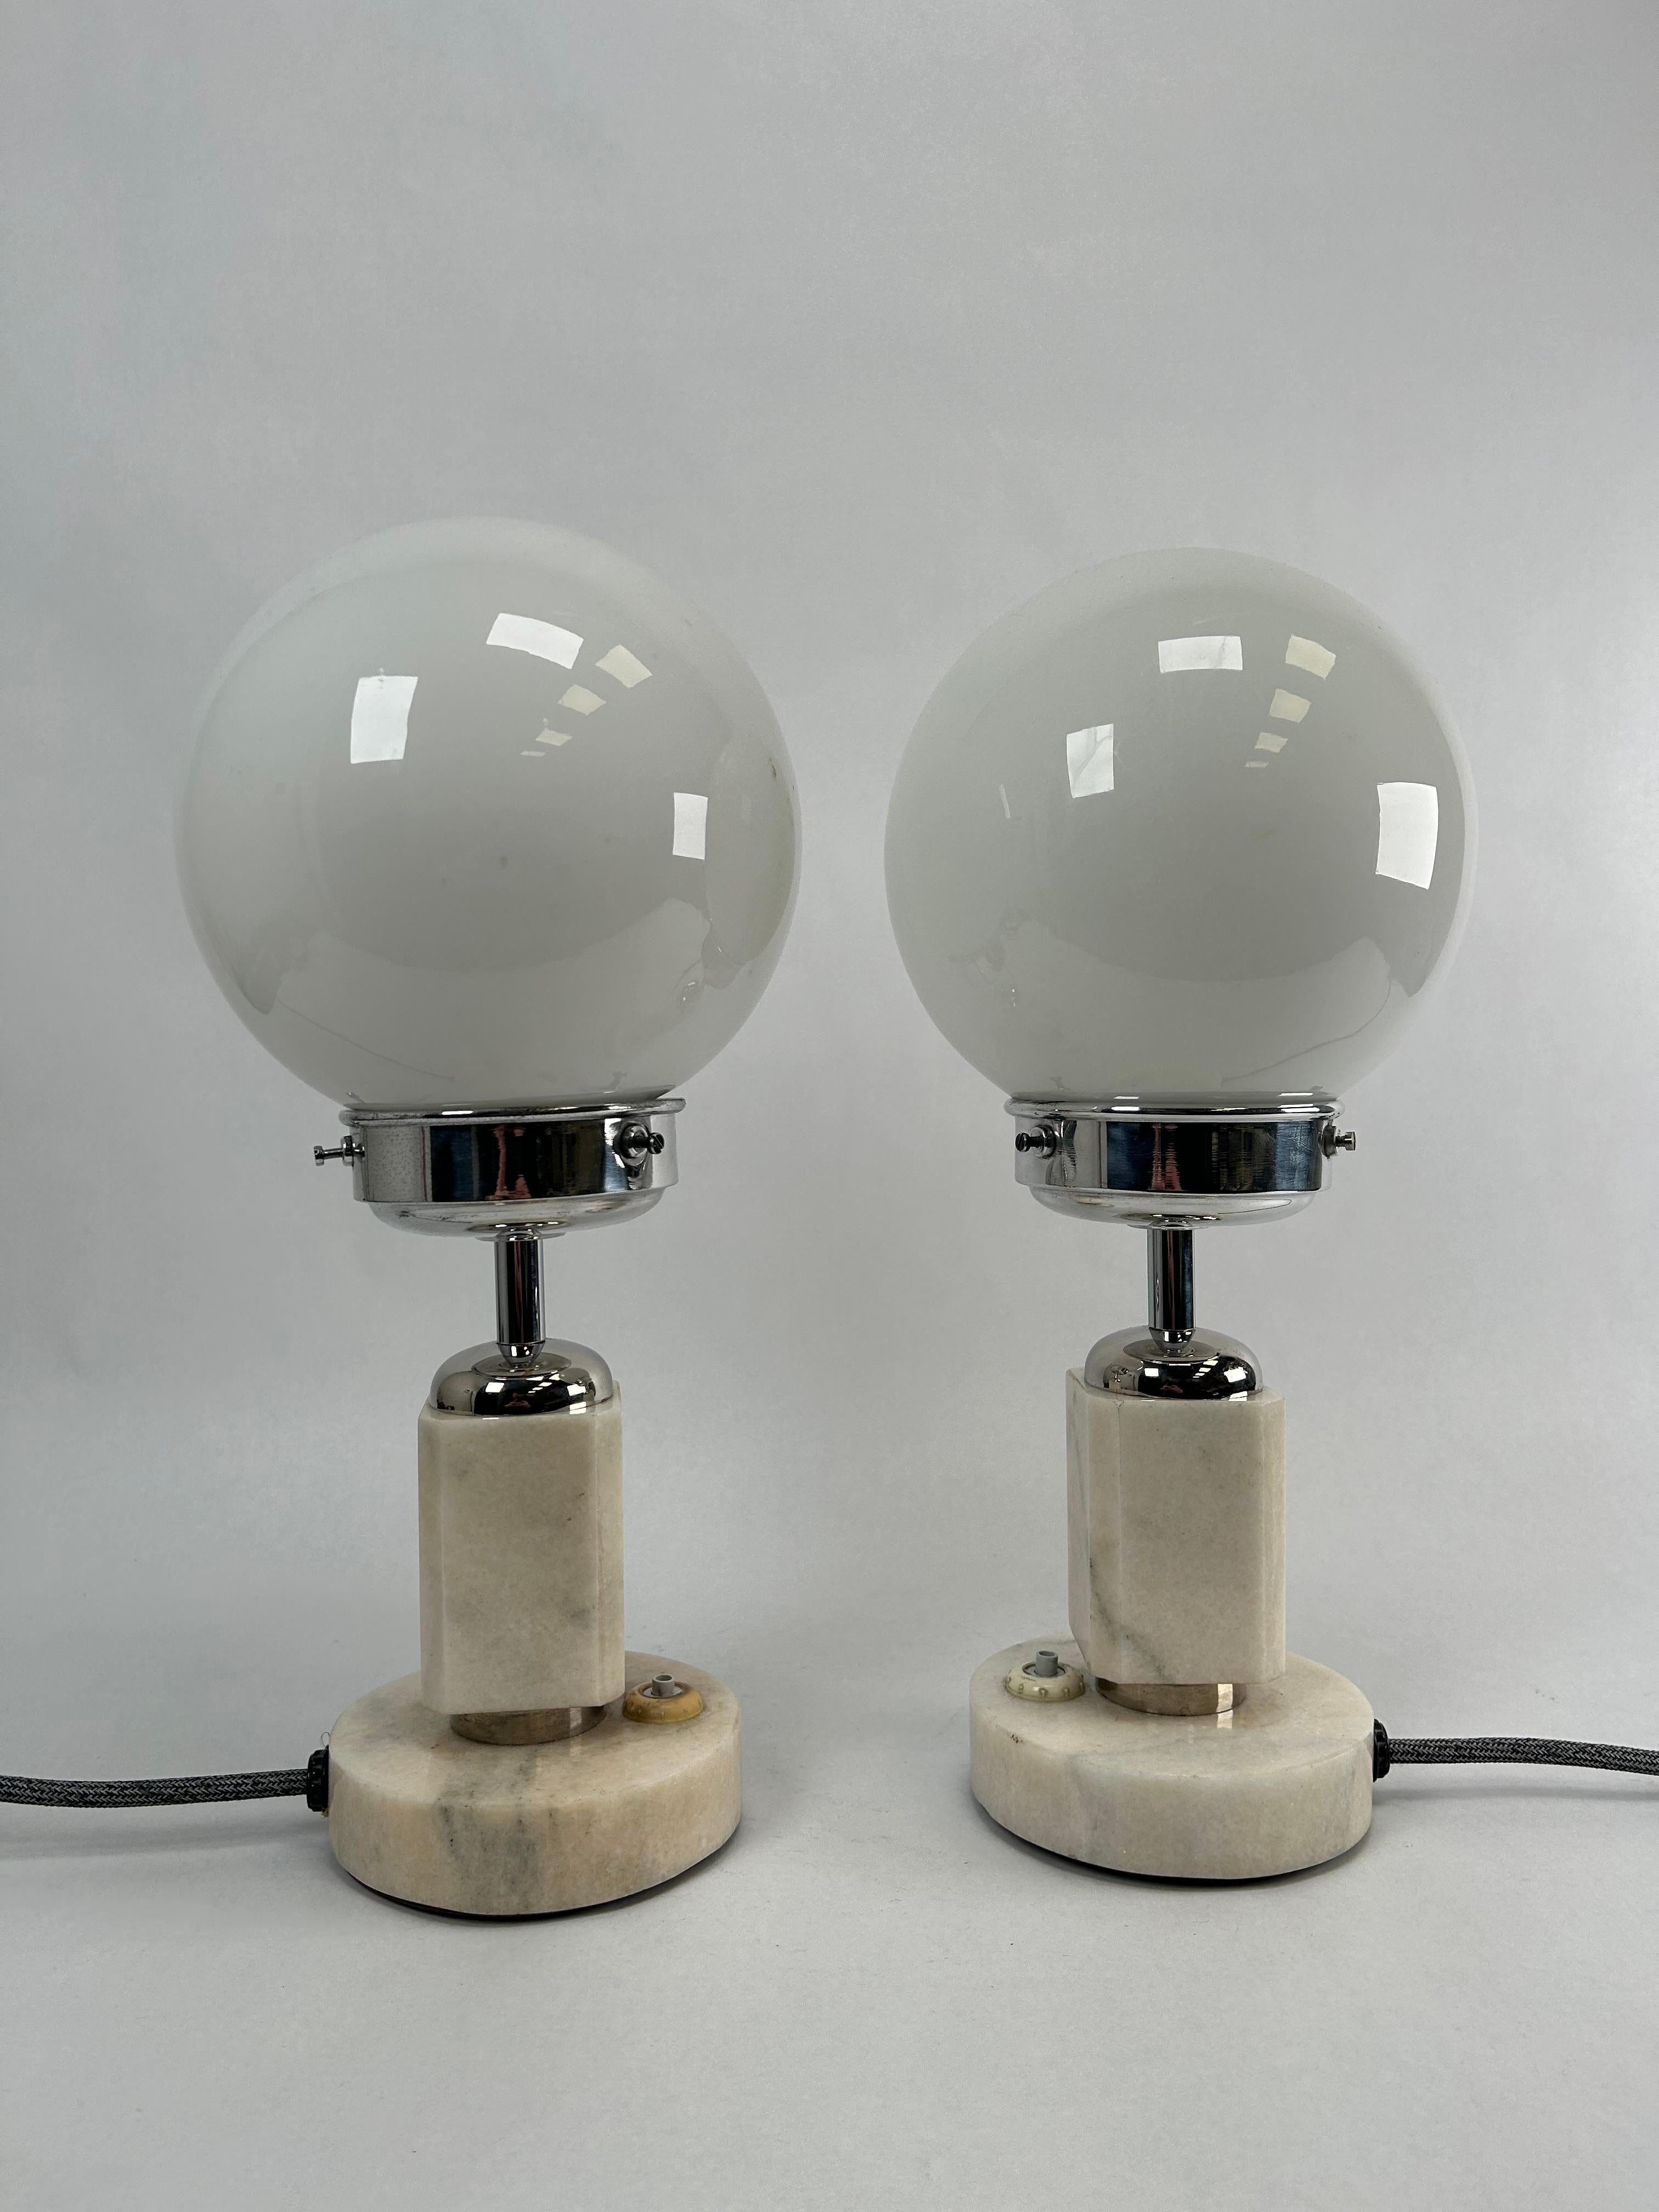 Bauhaus bedside table lamps with marble base and opaline glass lampshades. New wires and EU plug.